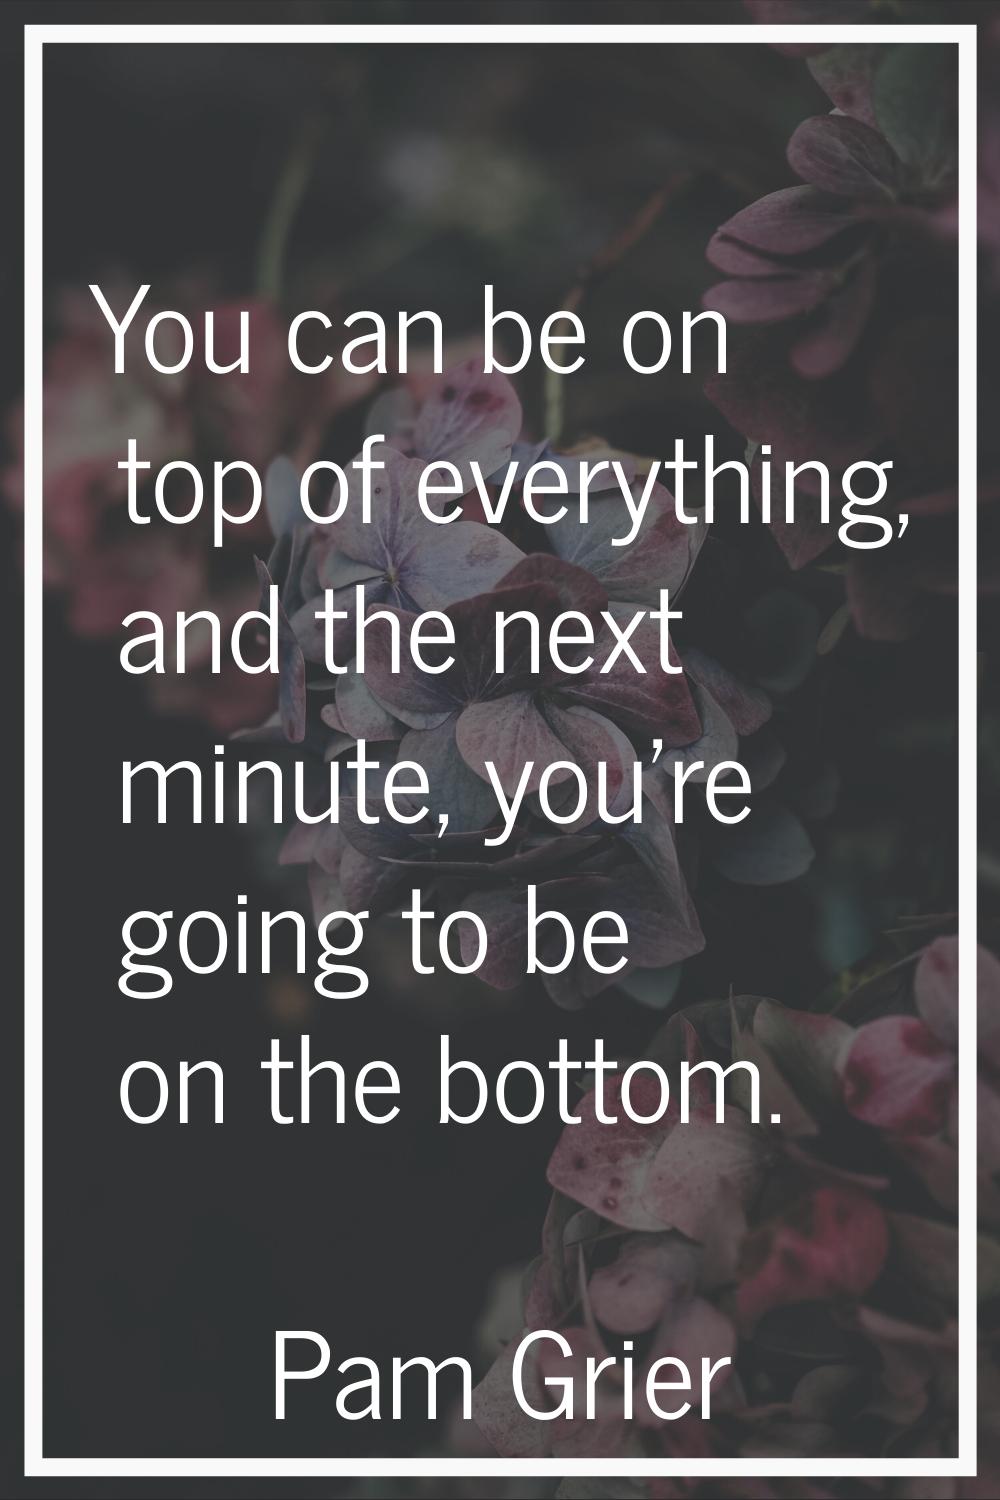 You can be on top of everything, and the next minute, you're going to be on the bottom.